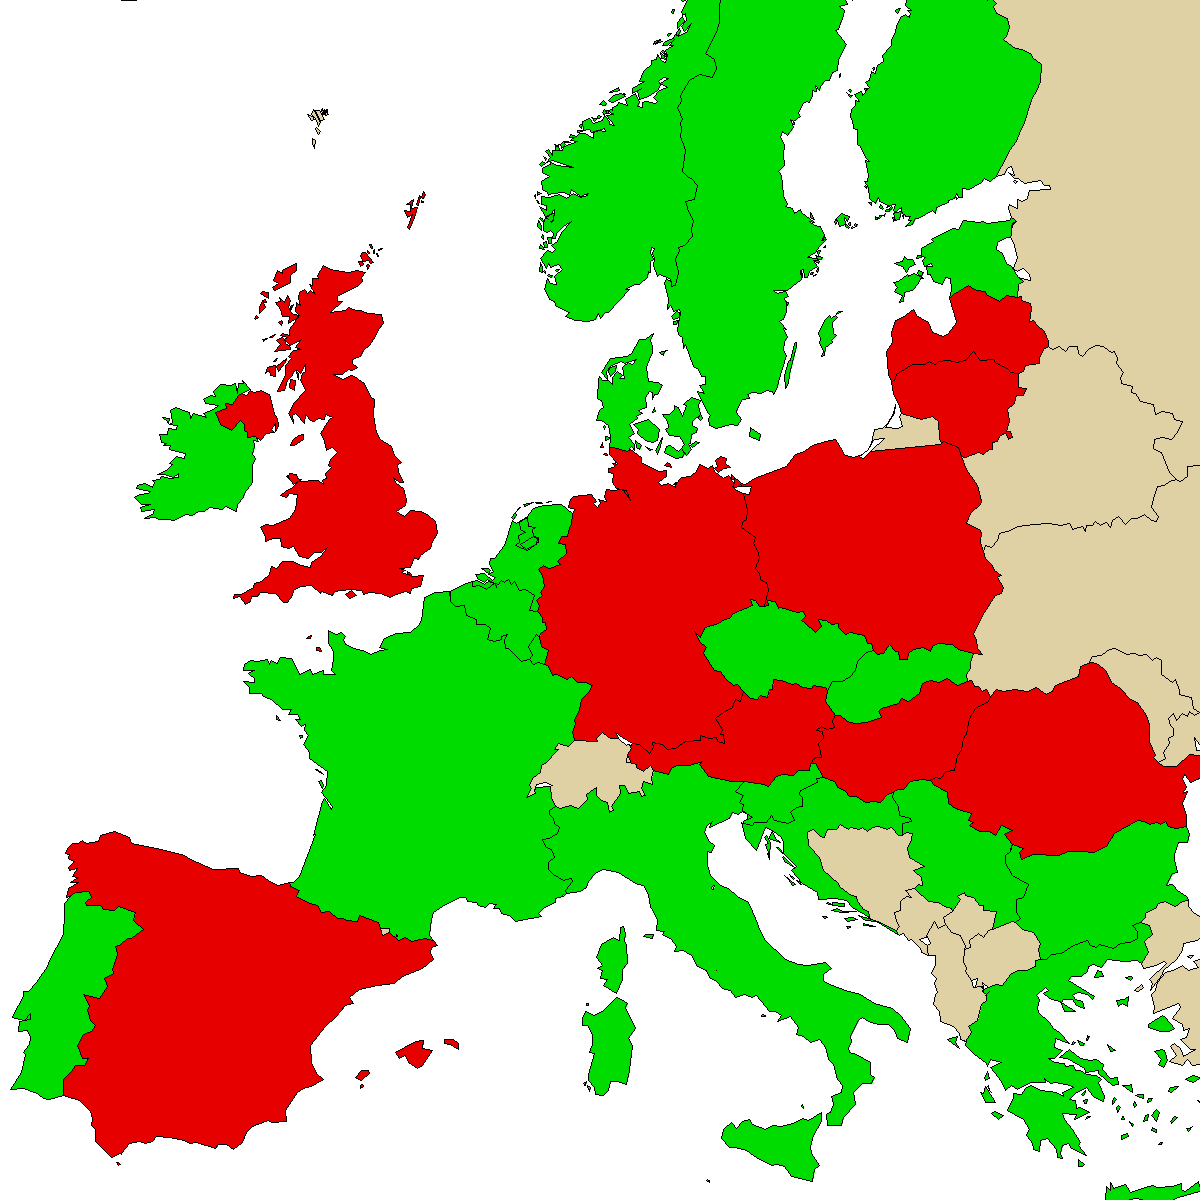 legal info map for our product Mephedrene, green are countries where we found no ban, red with ban, grey is unknown